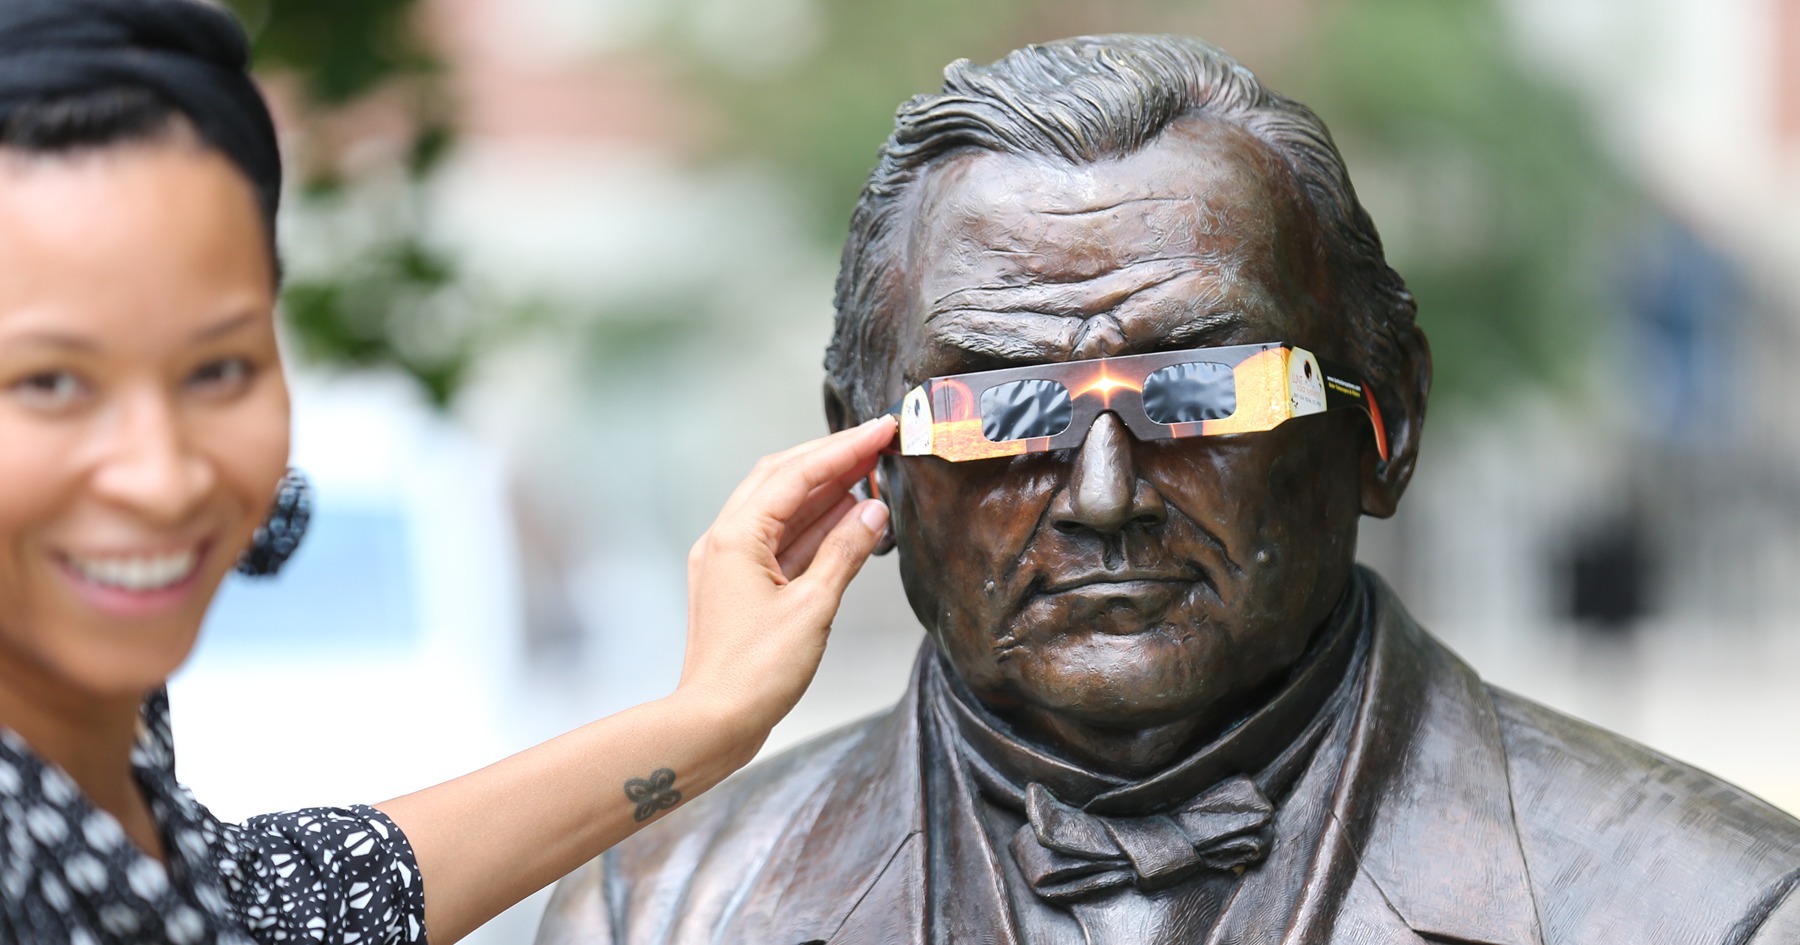 Even John Purdue uses safety glasses to view the eclipse